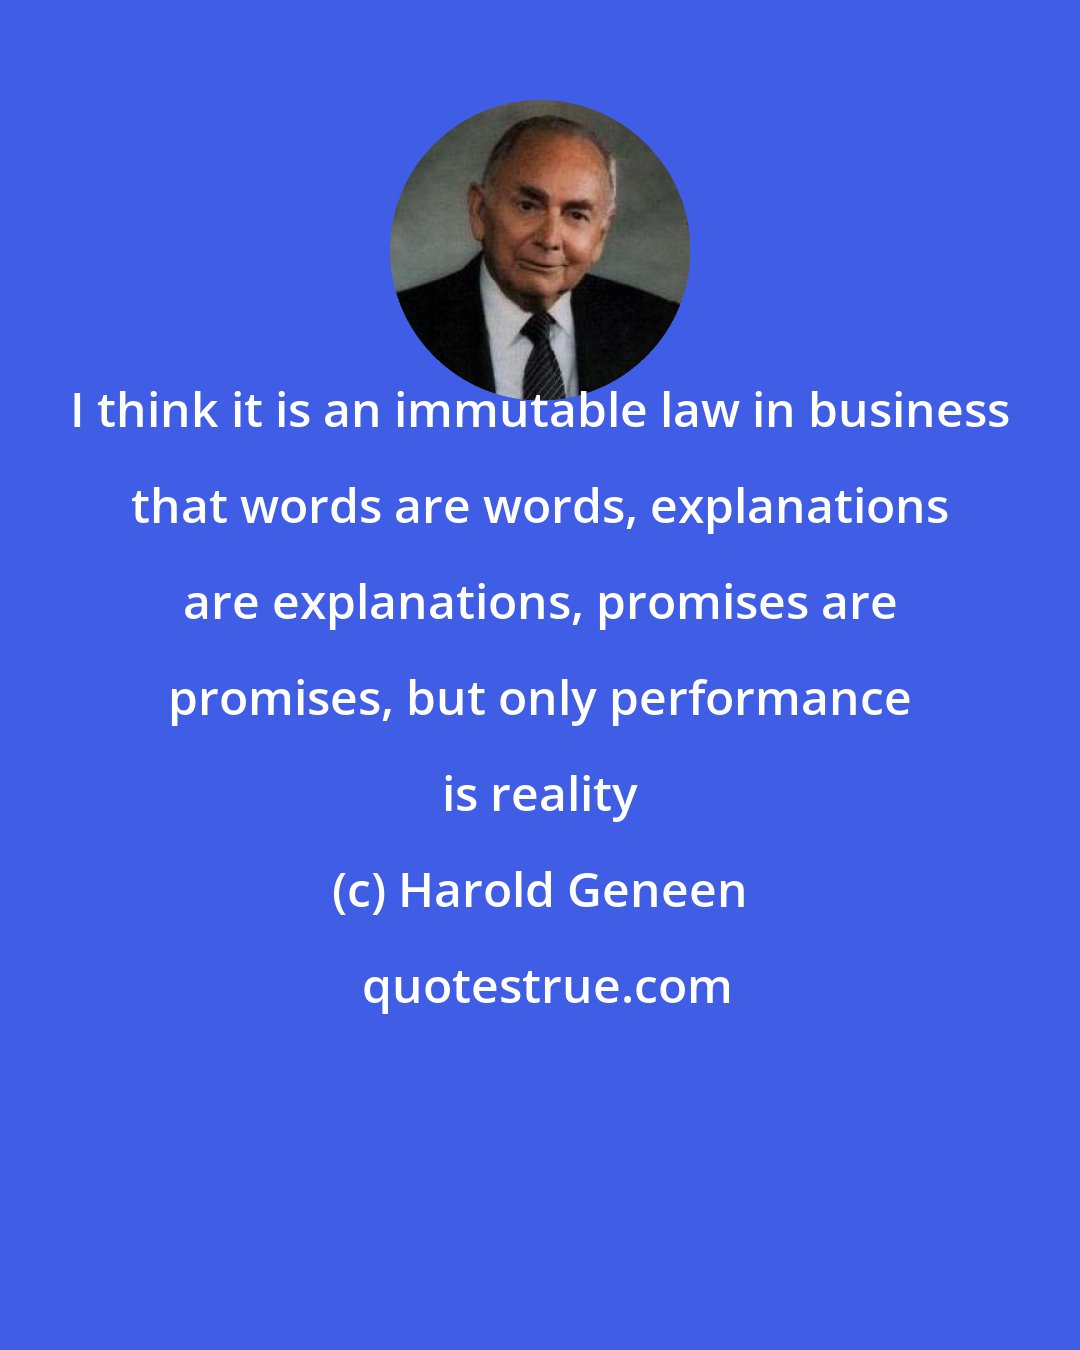 Harold Geneen: I think it is an immutable law in business that words are words, explanations are explanations, promises are promises, but only performance is reality